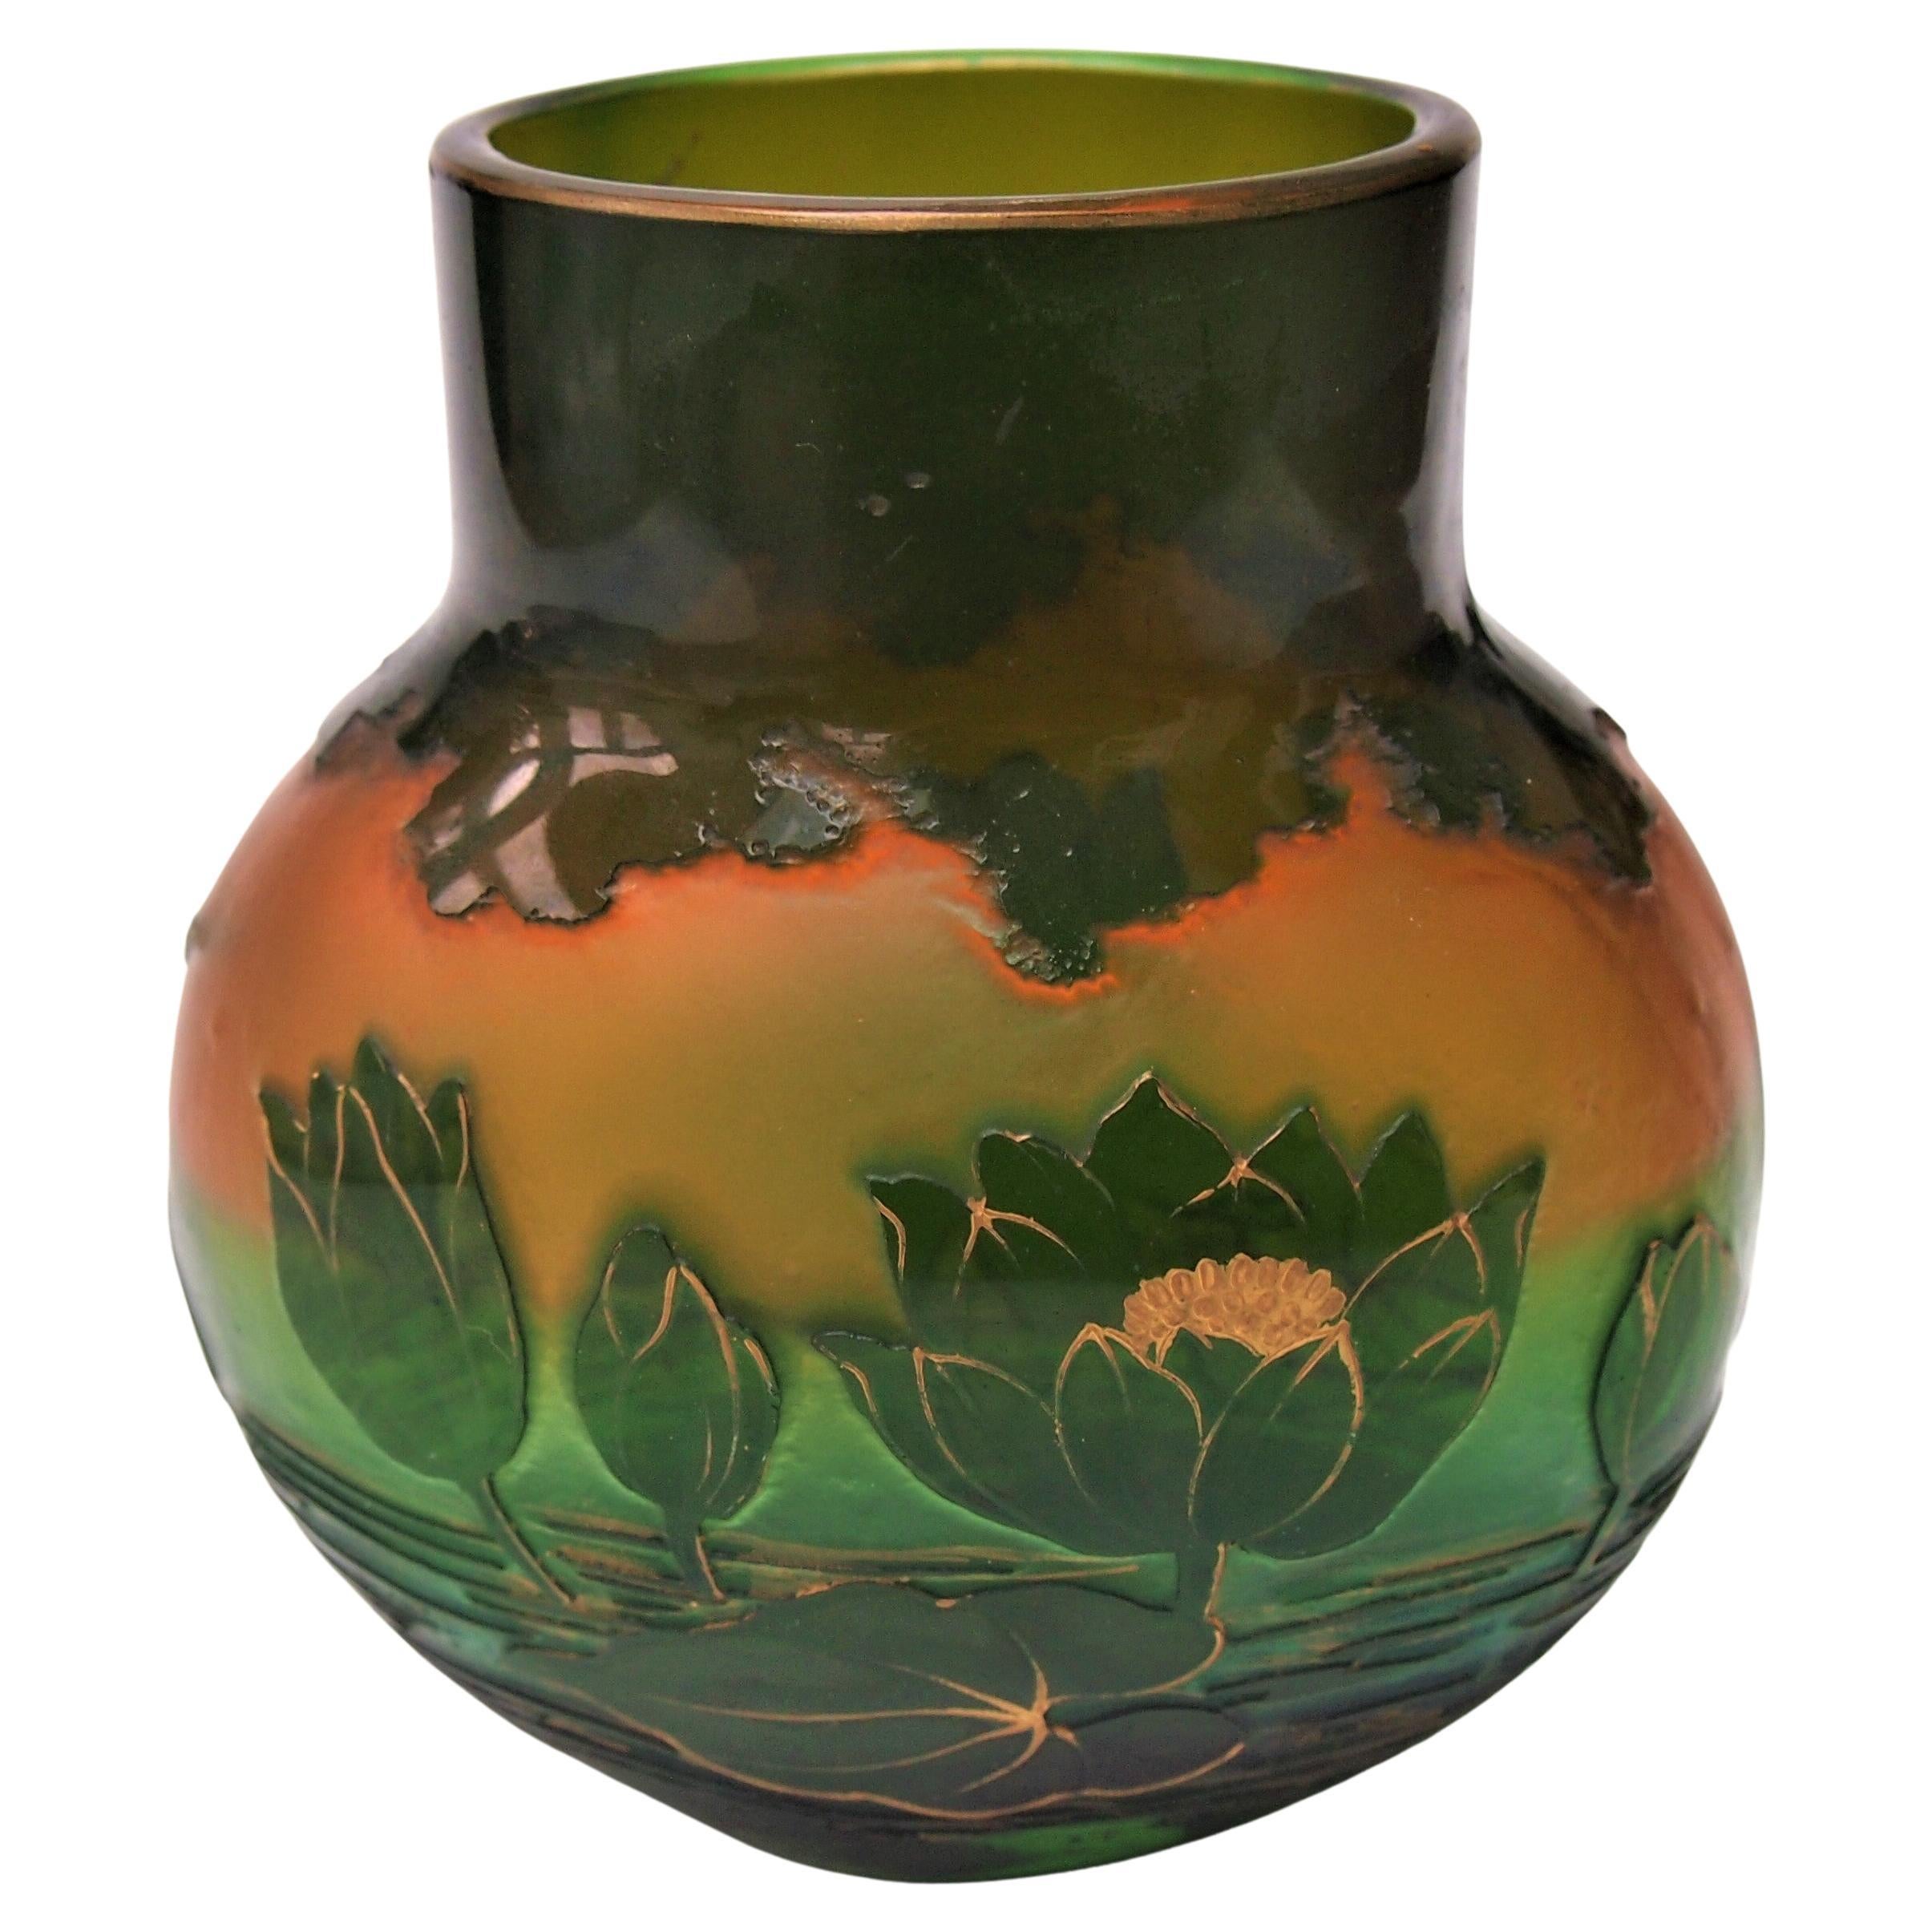 Harrach Waterlily Cameo Vase green over opal orange glass gilded c1900